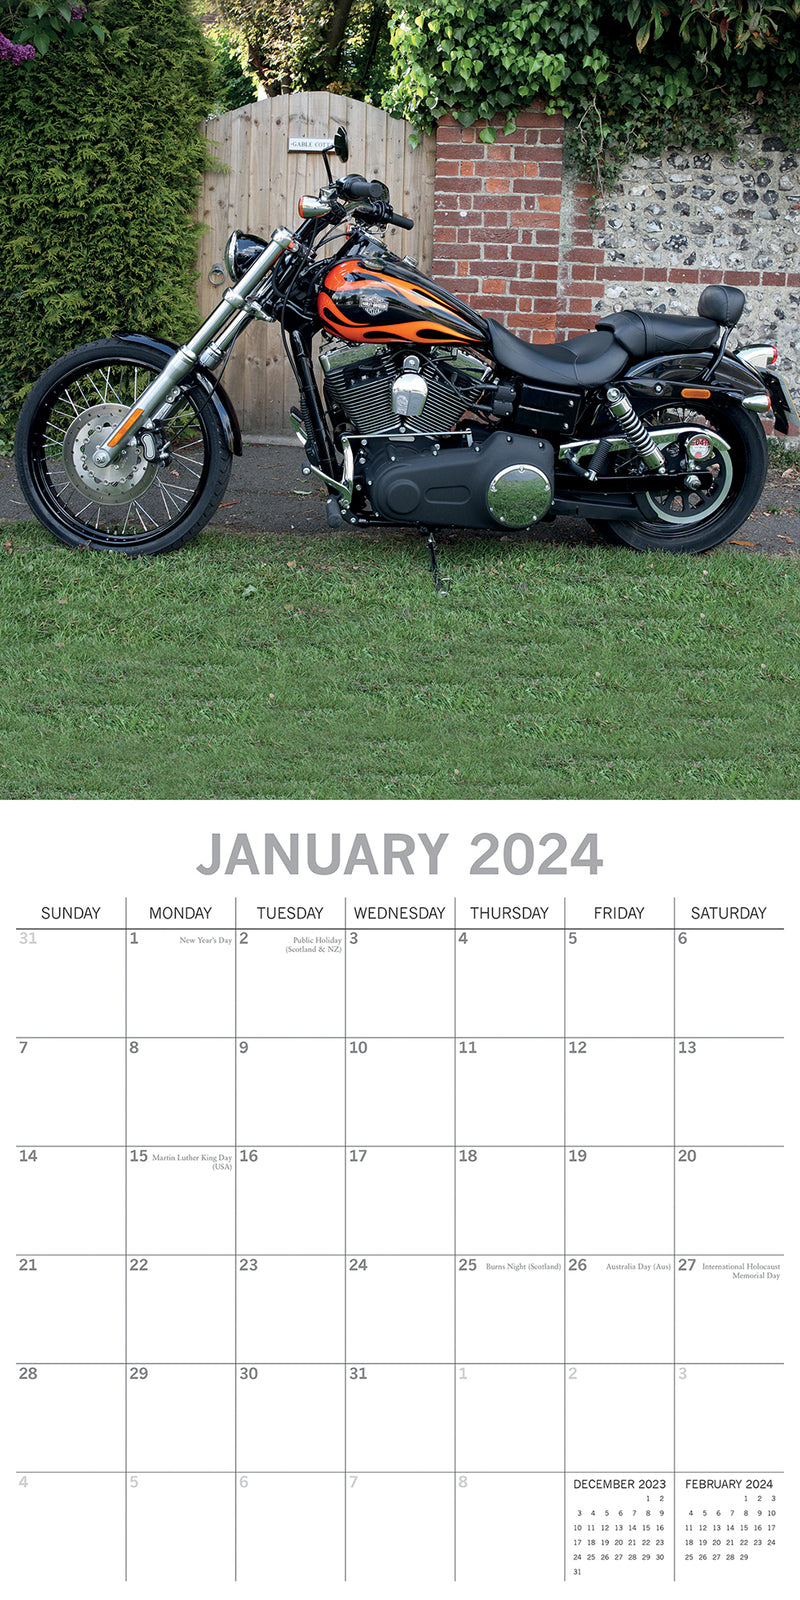 Harleys - 2024 Square Wall Calendar 16 Months Premium Planner Xmas New Year Gift